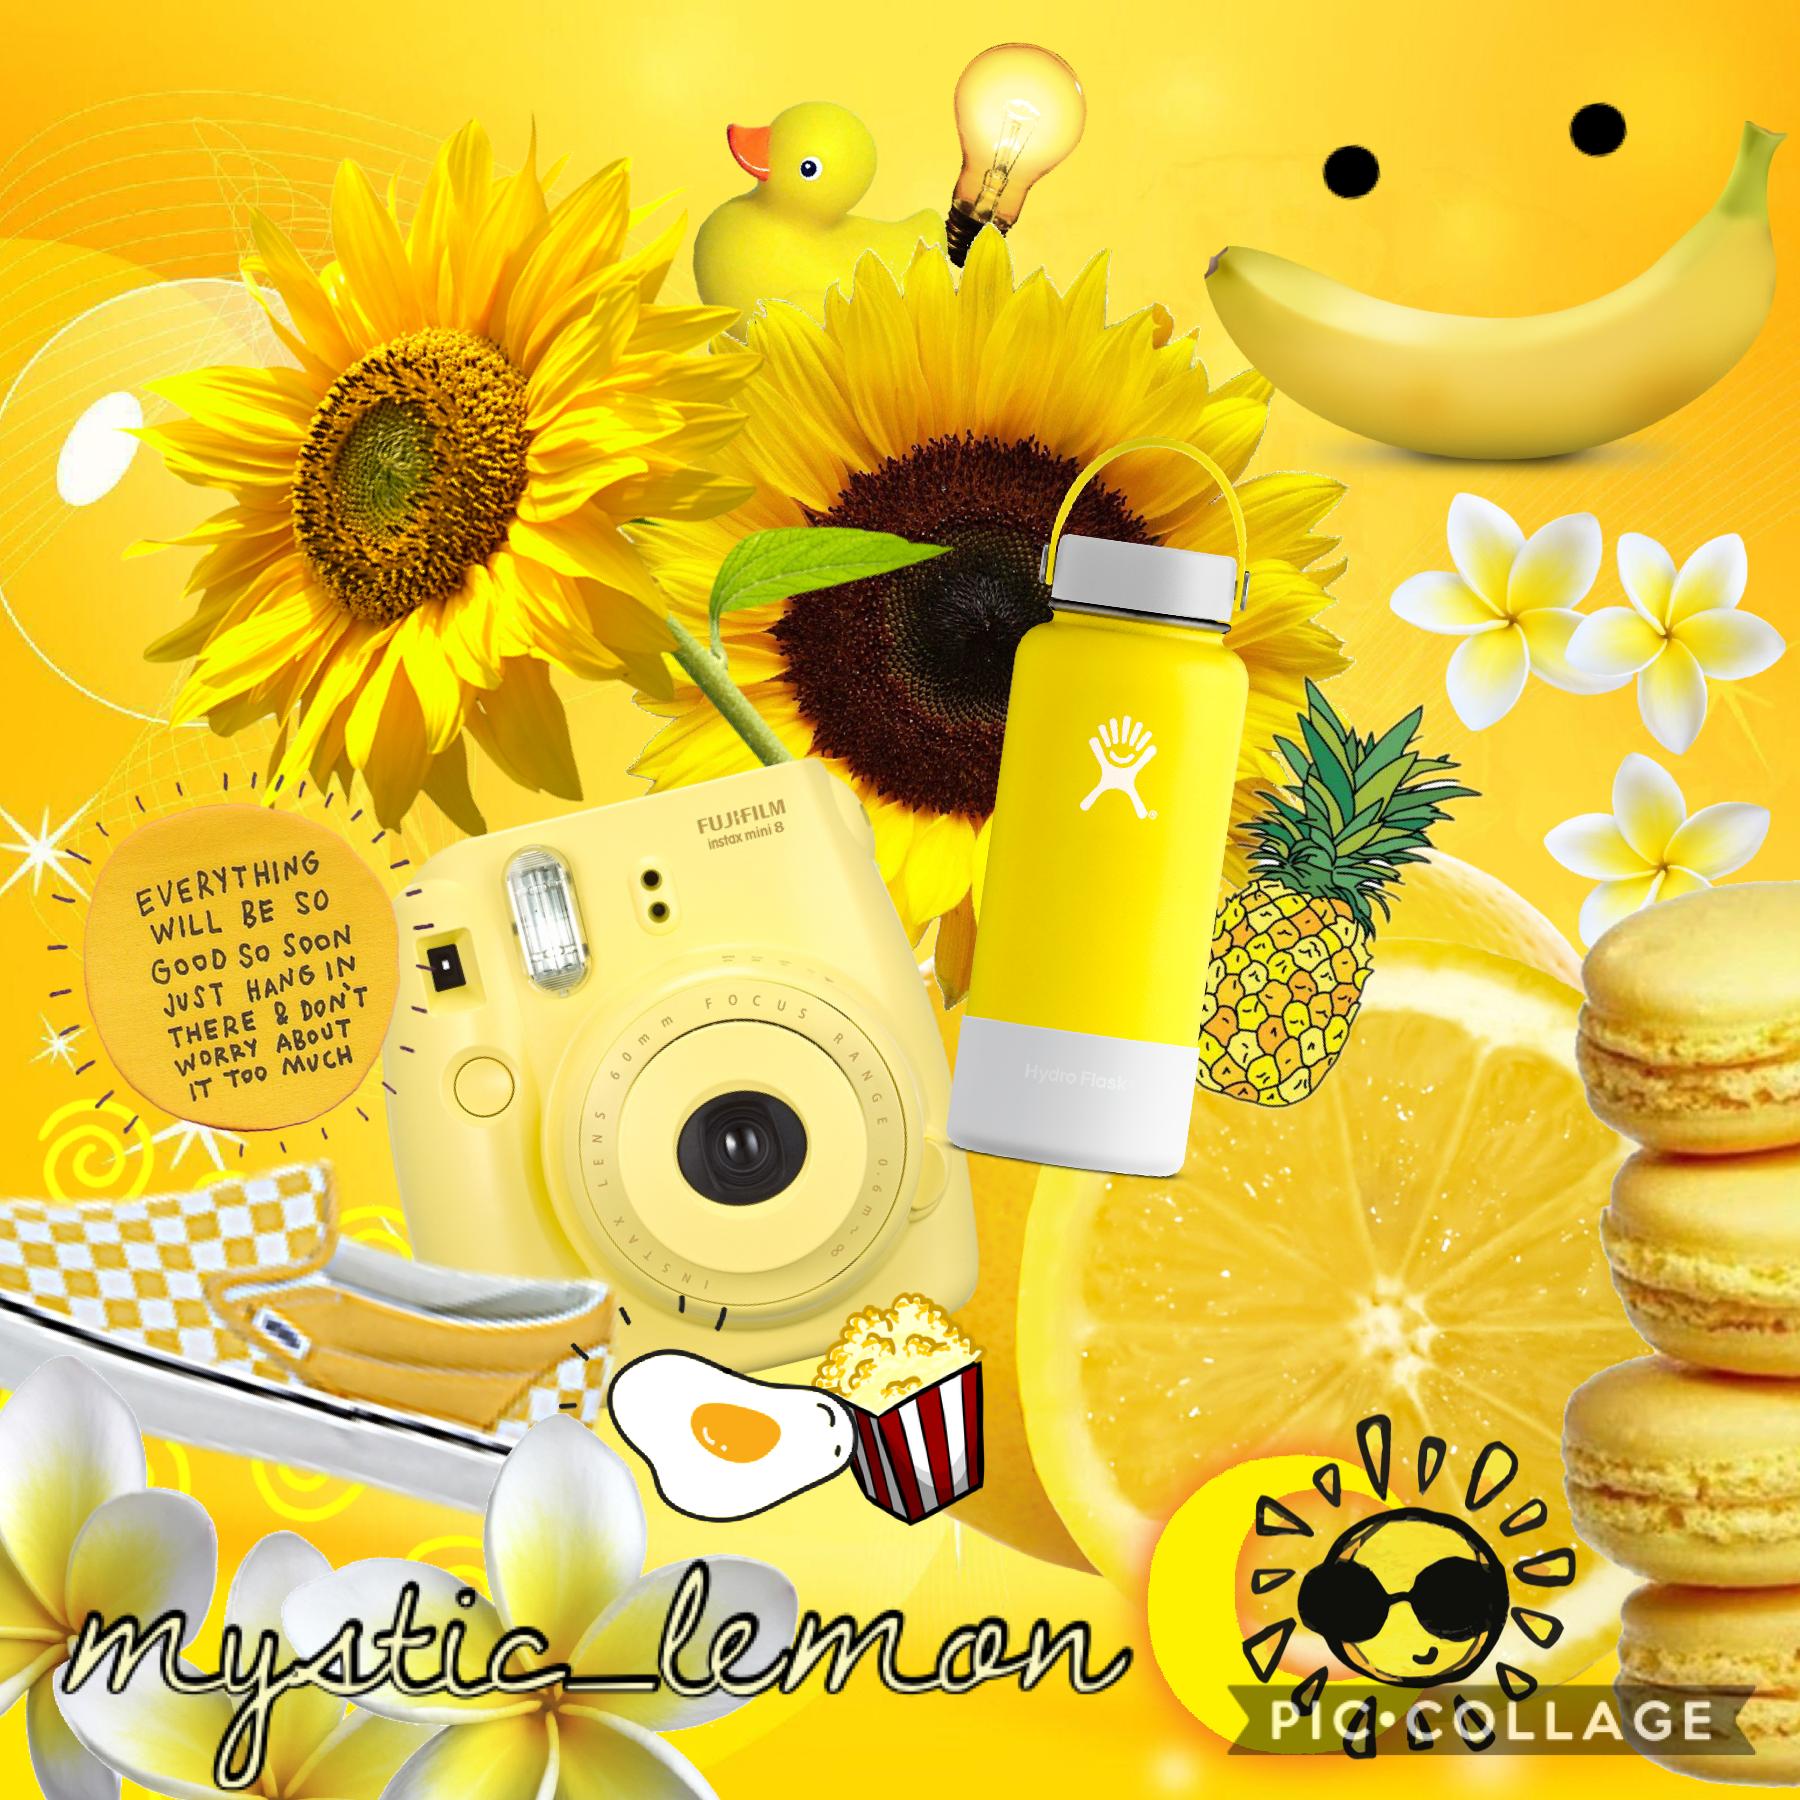 📒🛵☀️✨tap😋🌤🌻🍋
i’m gonna be doing more because omg this is so much fun i suggest doing a colour themed collage!!! remix with yours